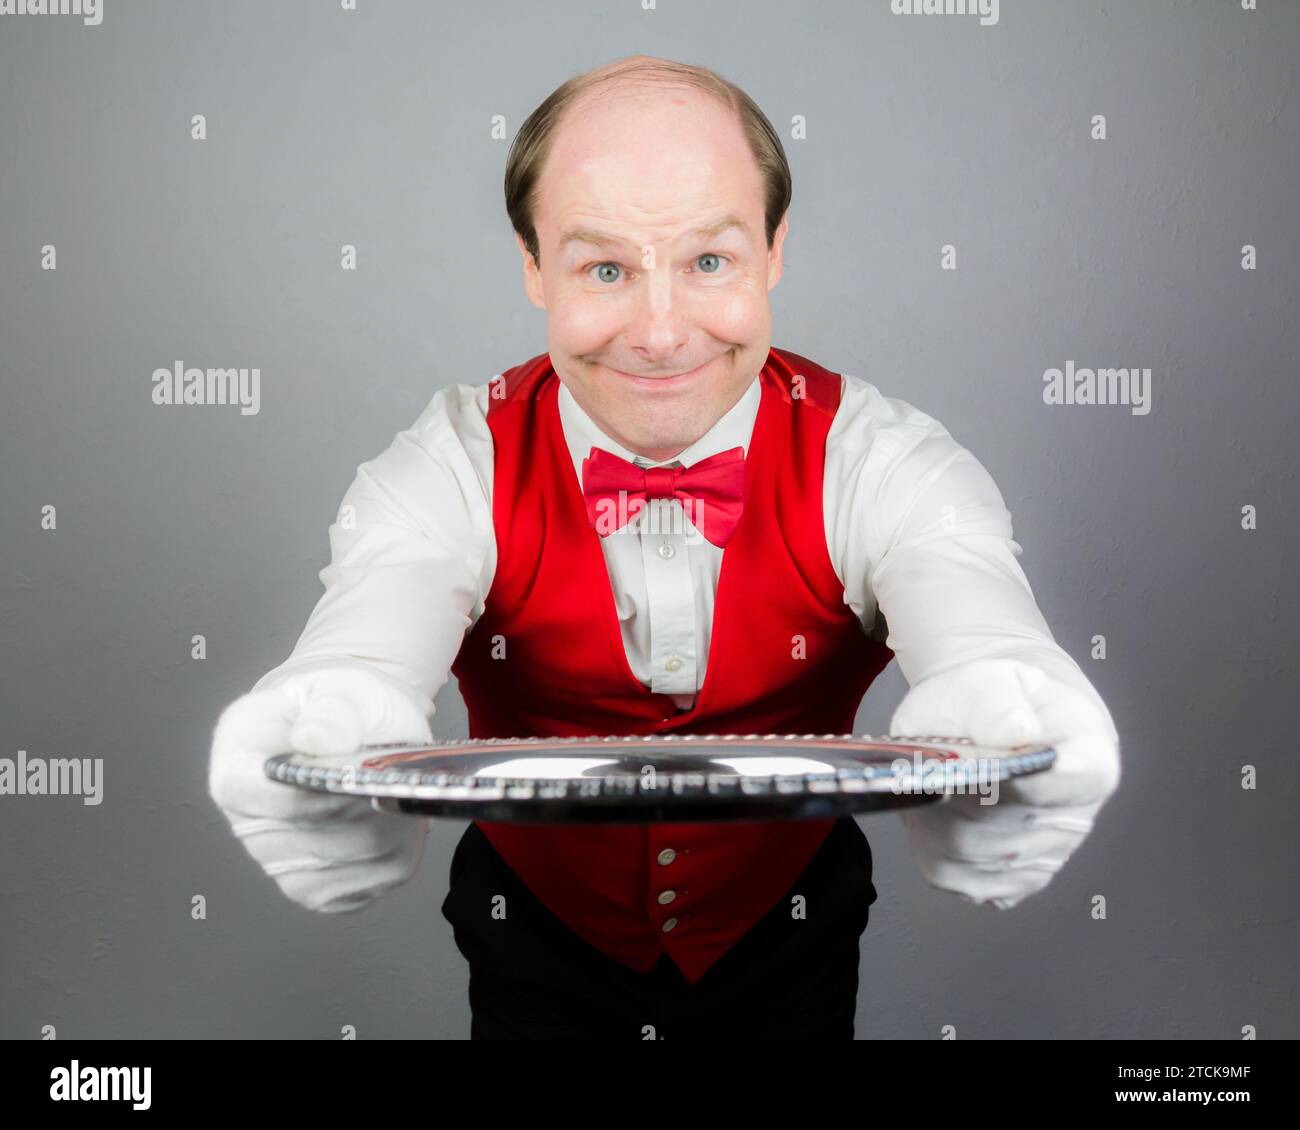 Portrait of Waiter or Servant in White Gloves and Red Vest or Waistcoat Smiling Kindly and Holding Silver Serving Tray. Professional Hospitality. Stock Photo